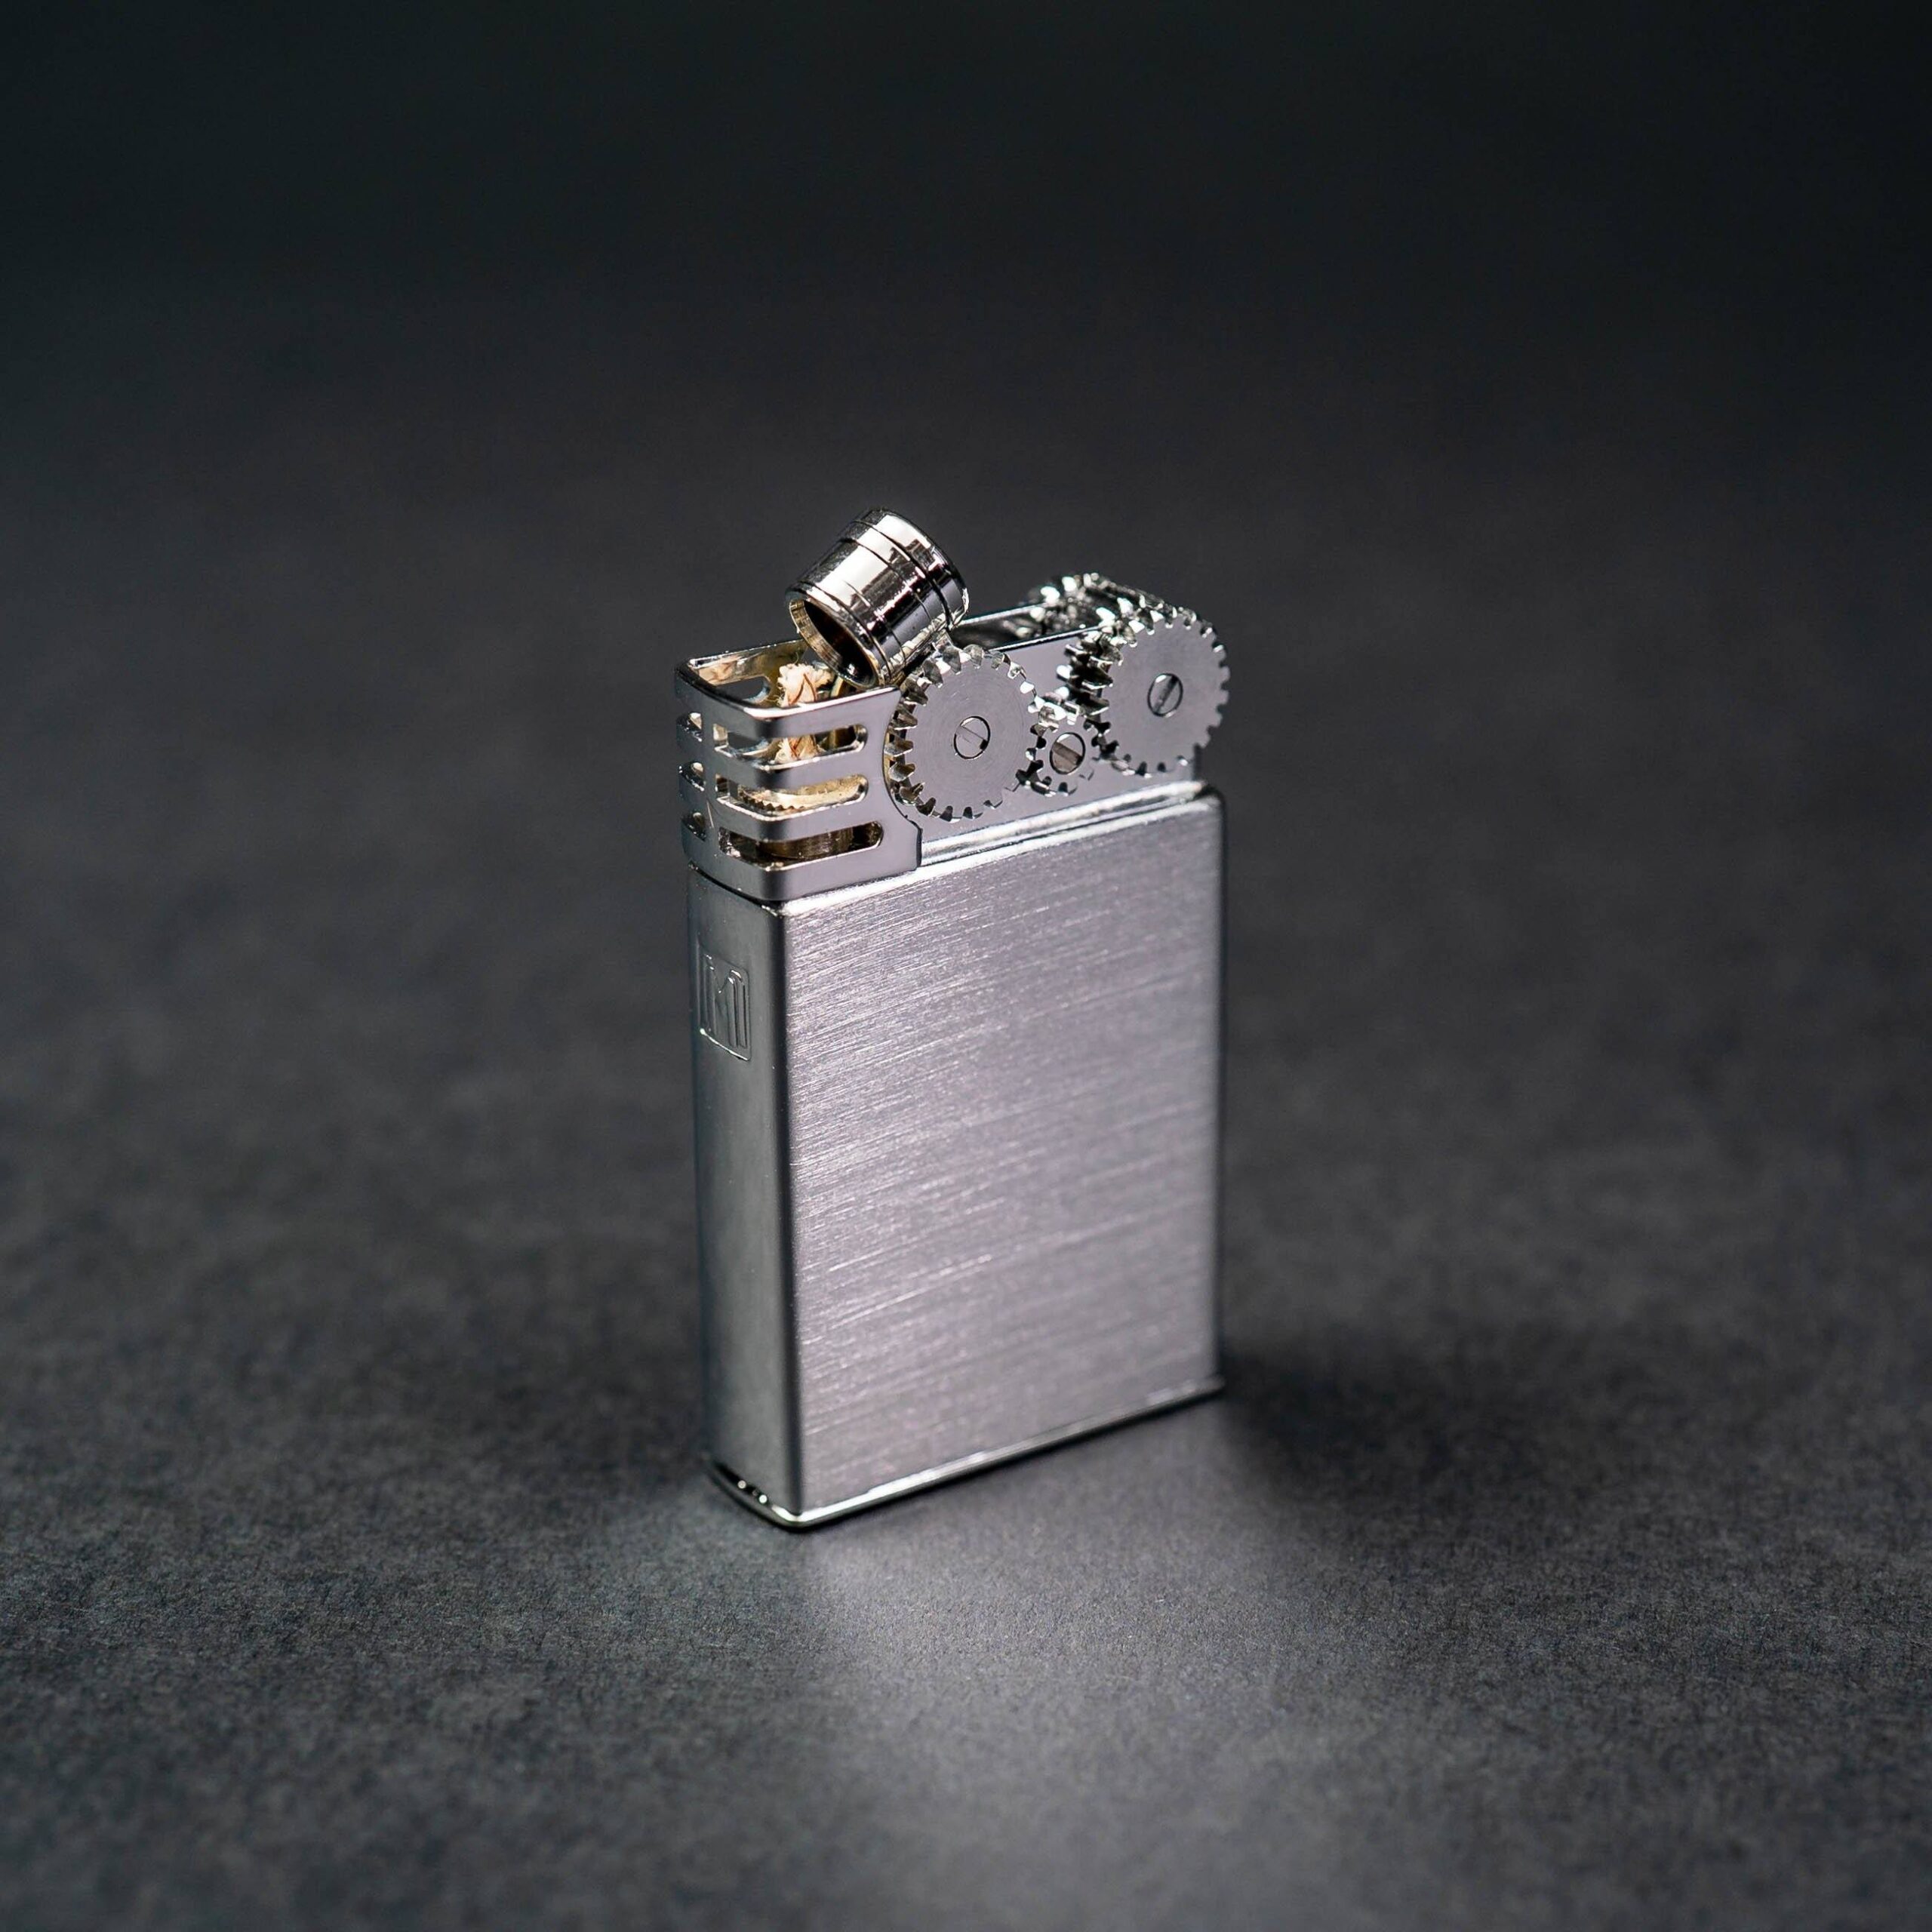 Only 24.60 usd for Tokyo Pipe Co. Marvelous Lighter Online at the Shop